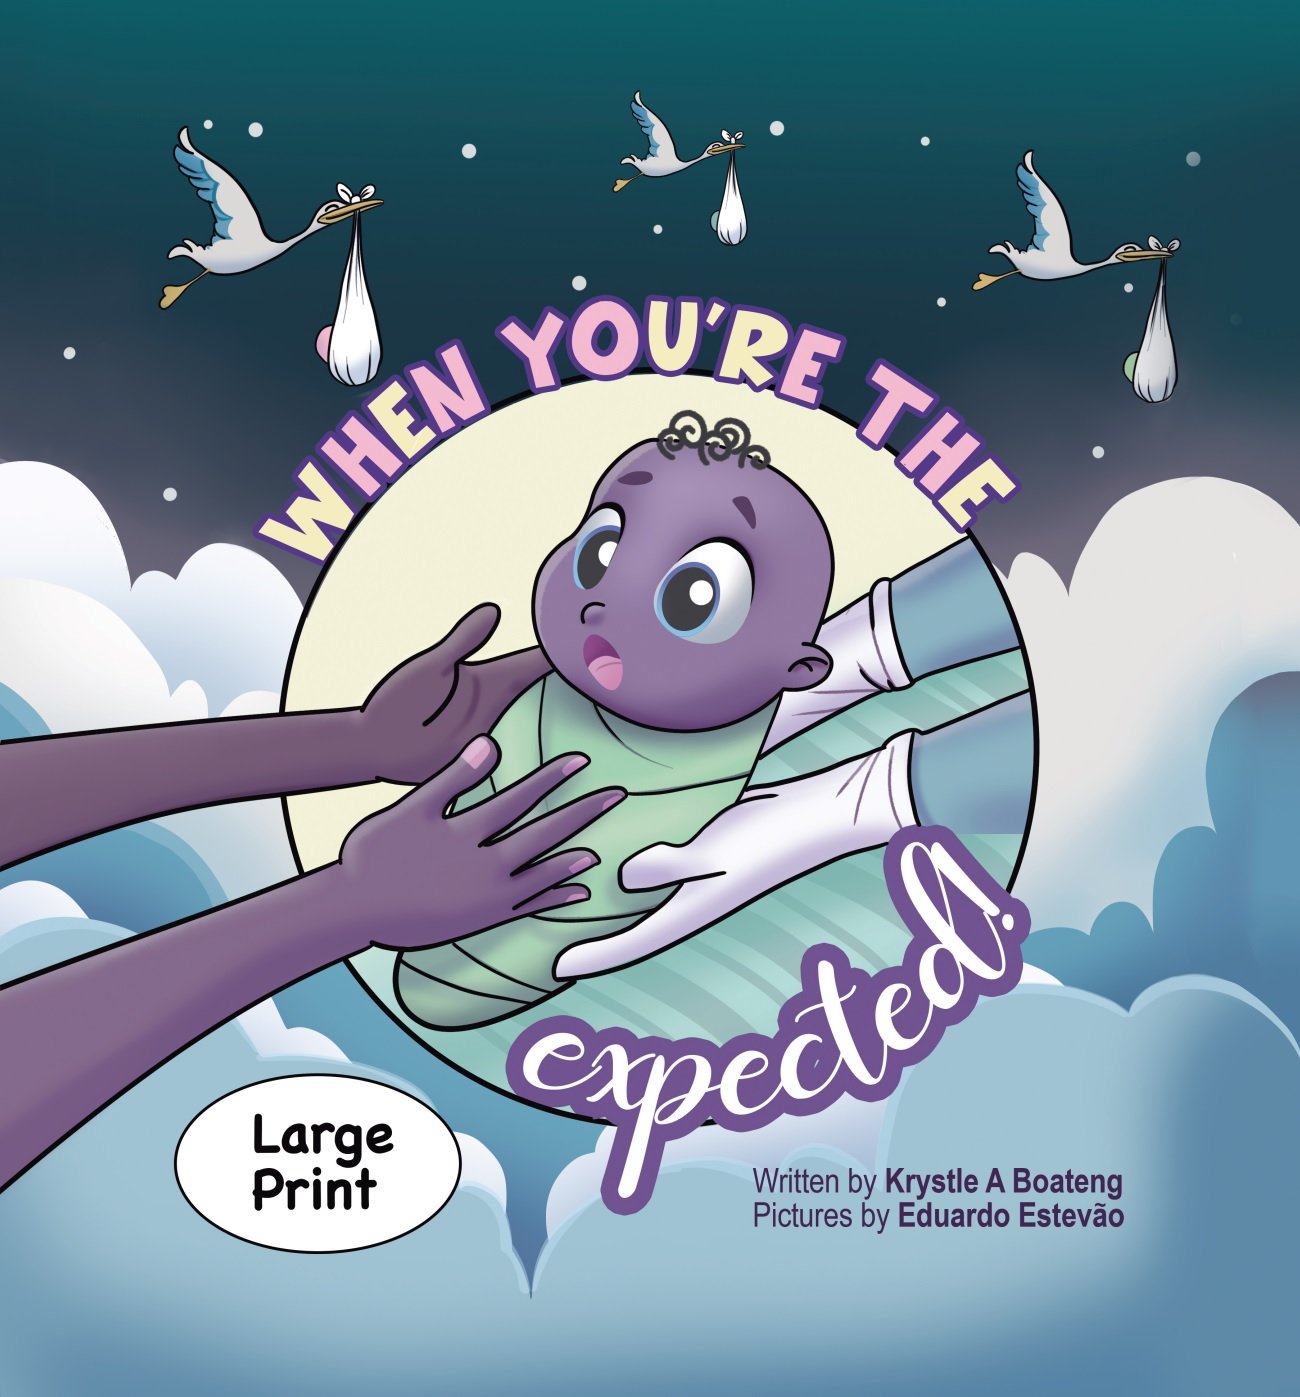 When you're the Expected! is a playful welcome home guide for newborns. Large Print, Reverse Contrast